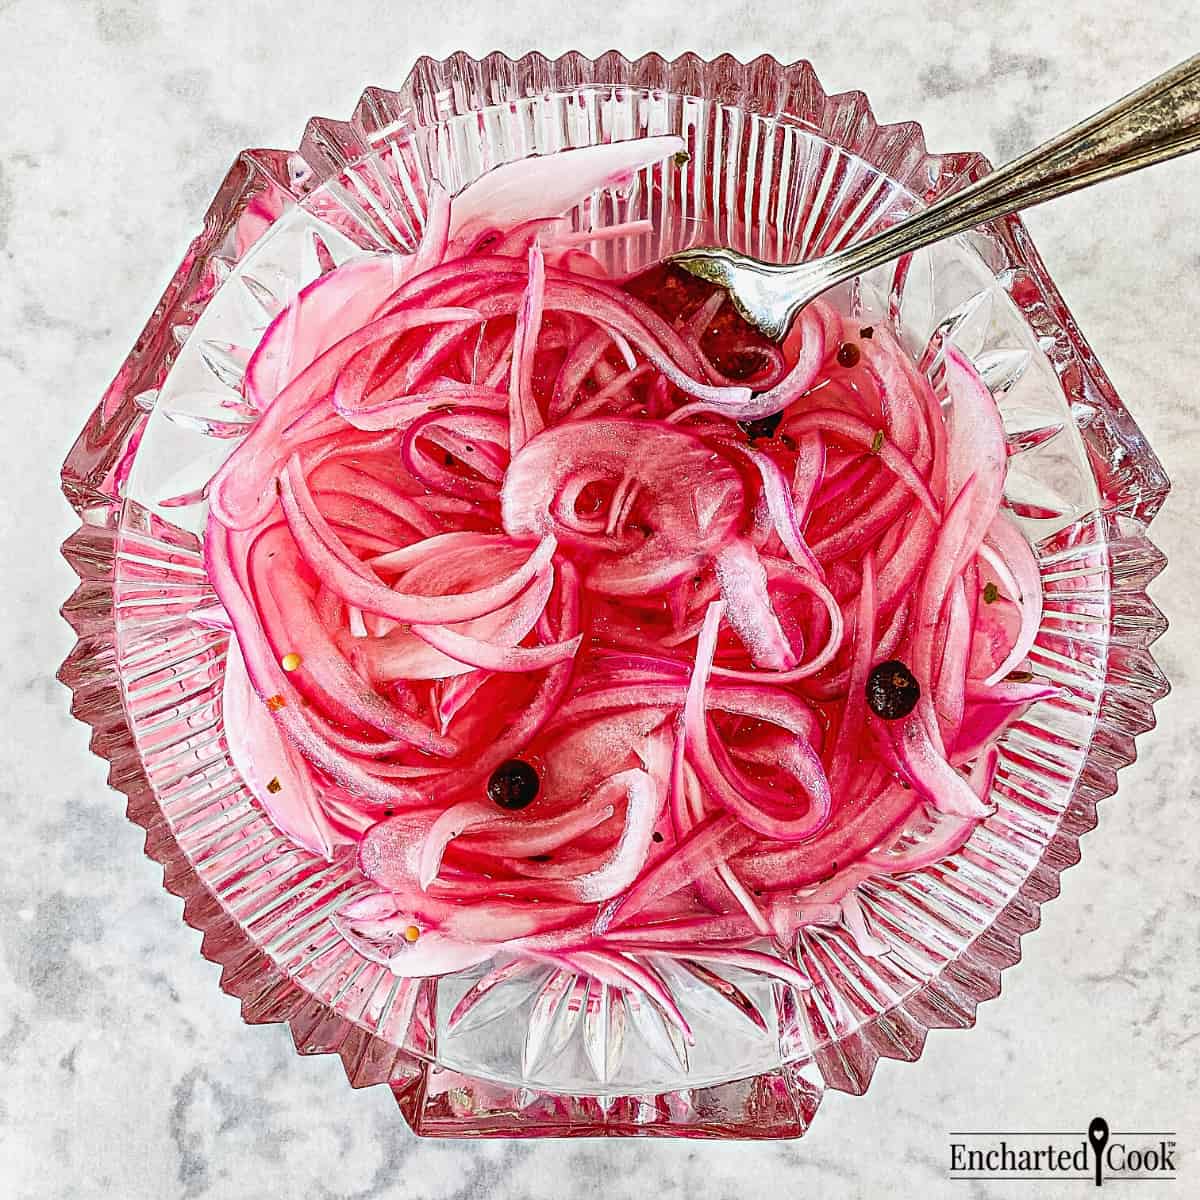 Slices of pink-colored pickled red onion in a fancy-cut glass dish with a fork.